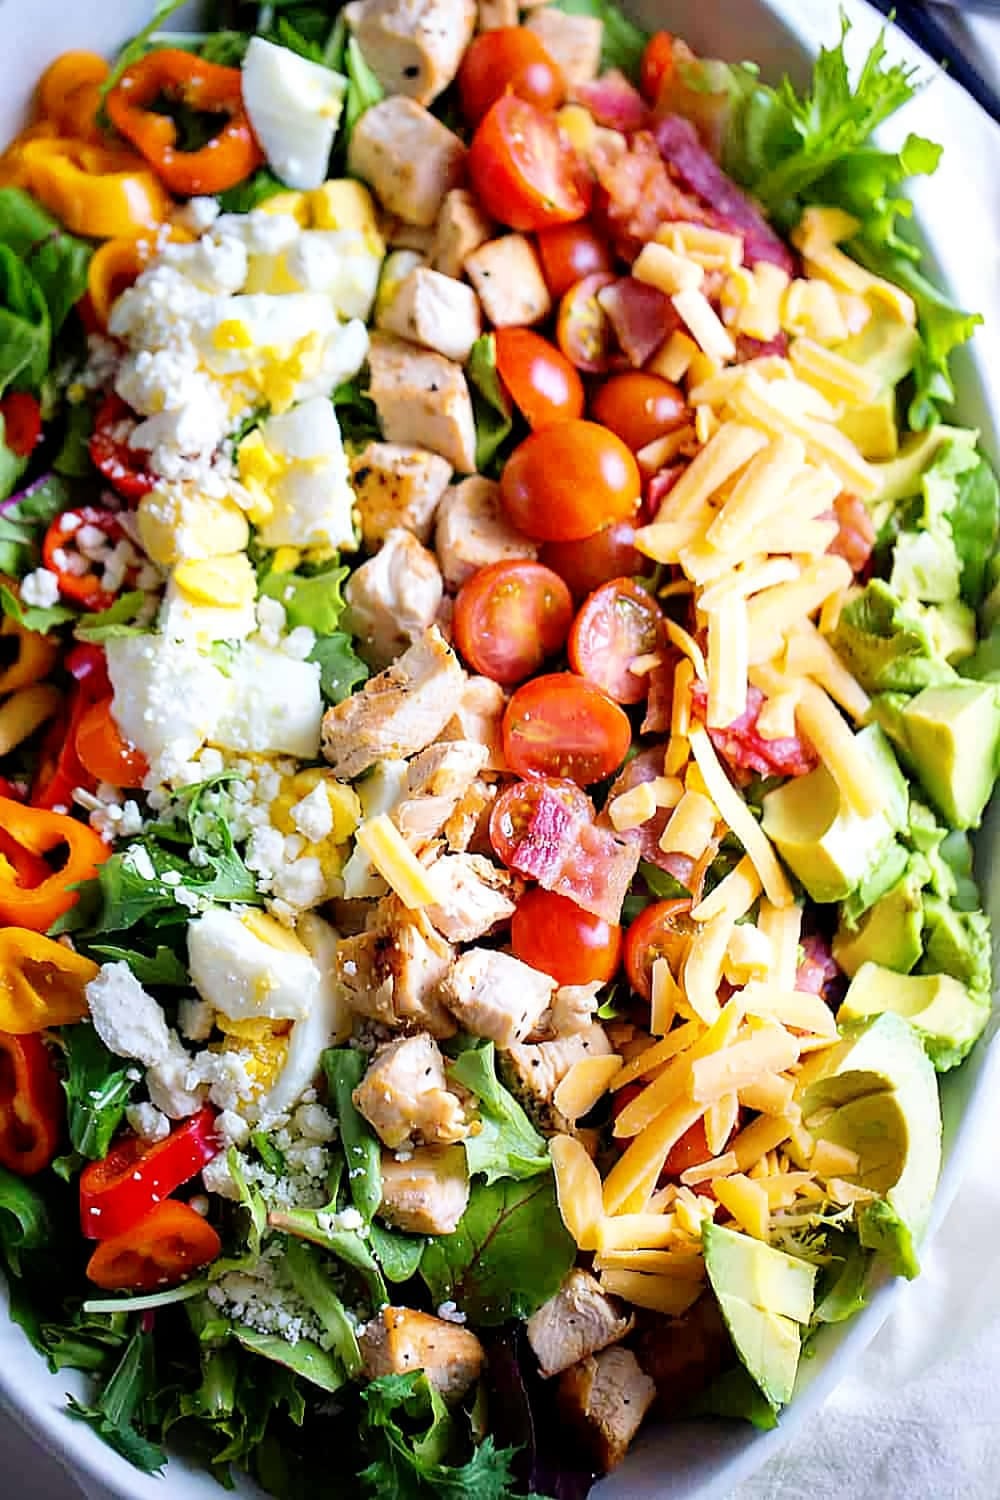 Colorful and Flavorful Deluxe Cobb Salad Recipe